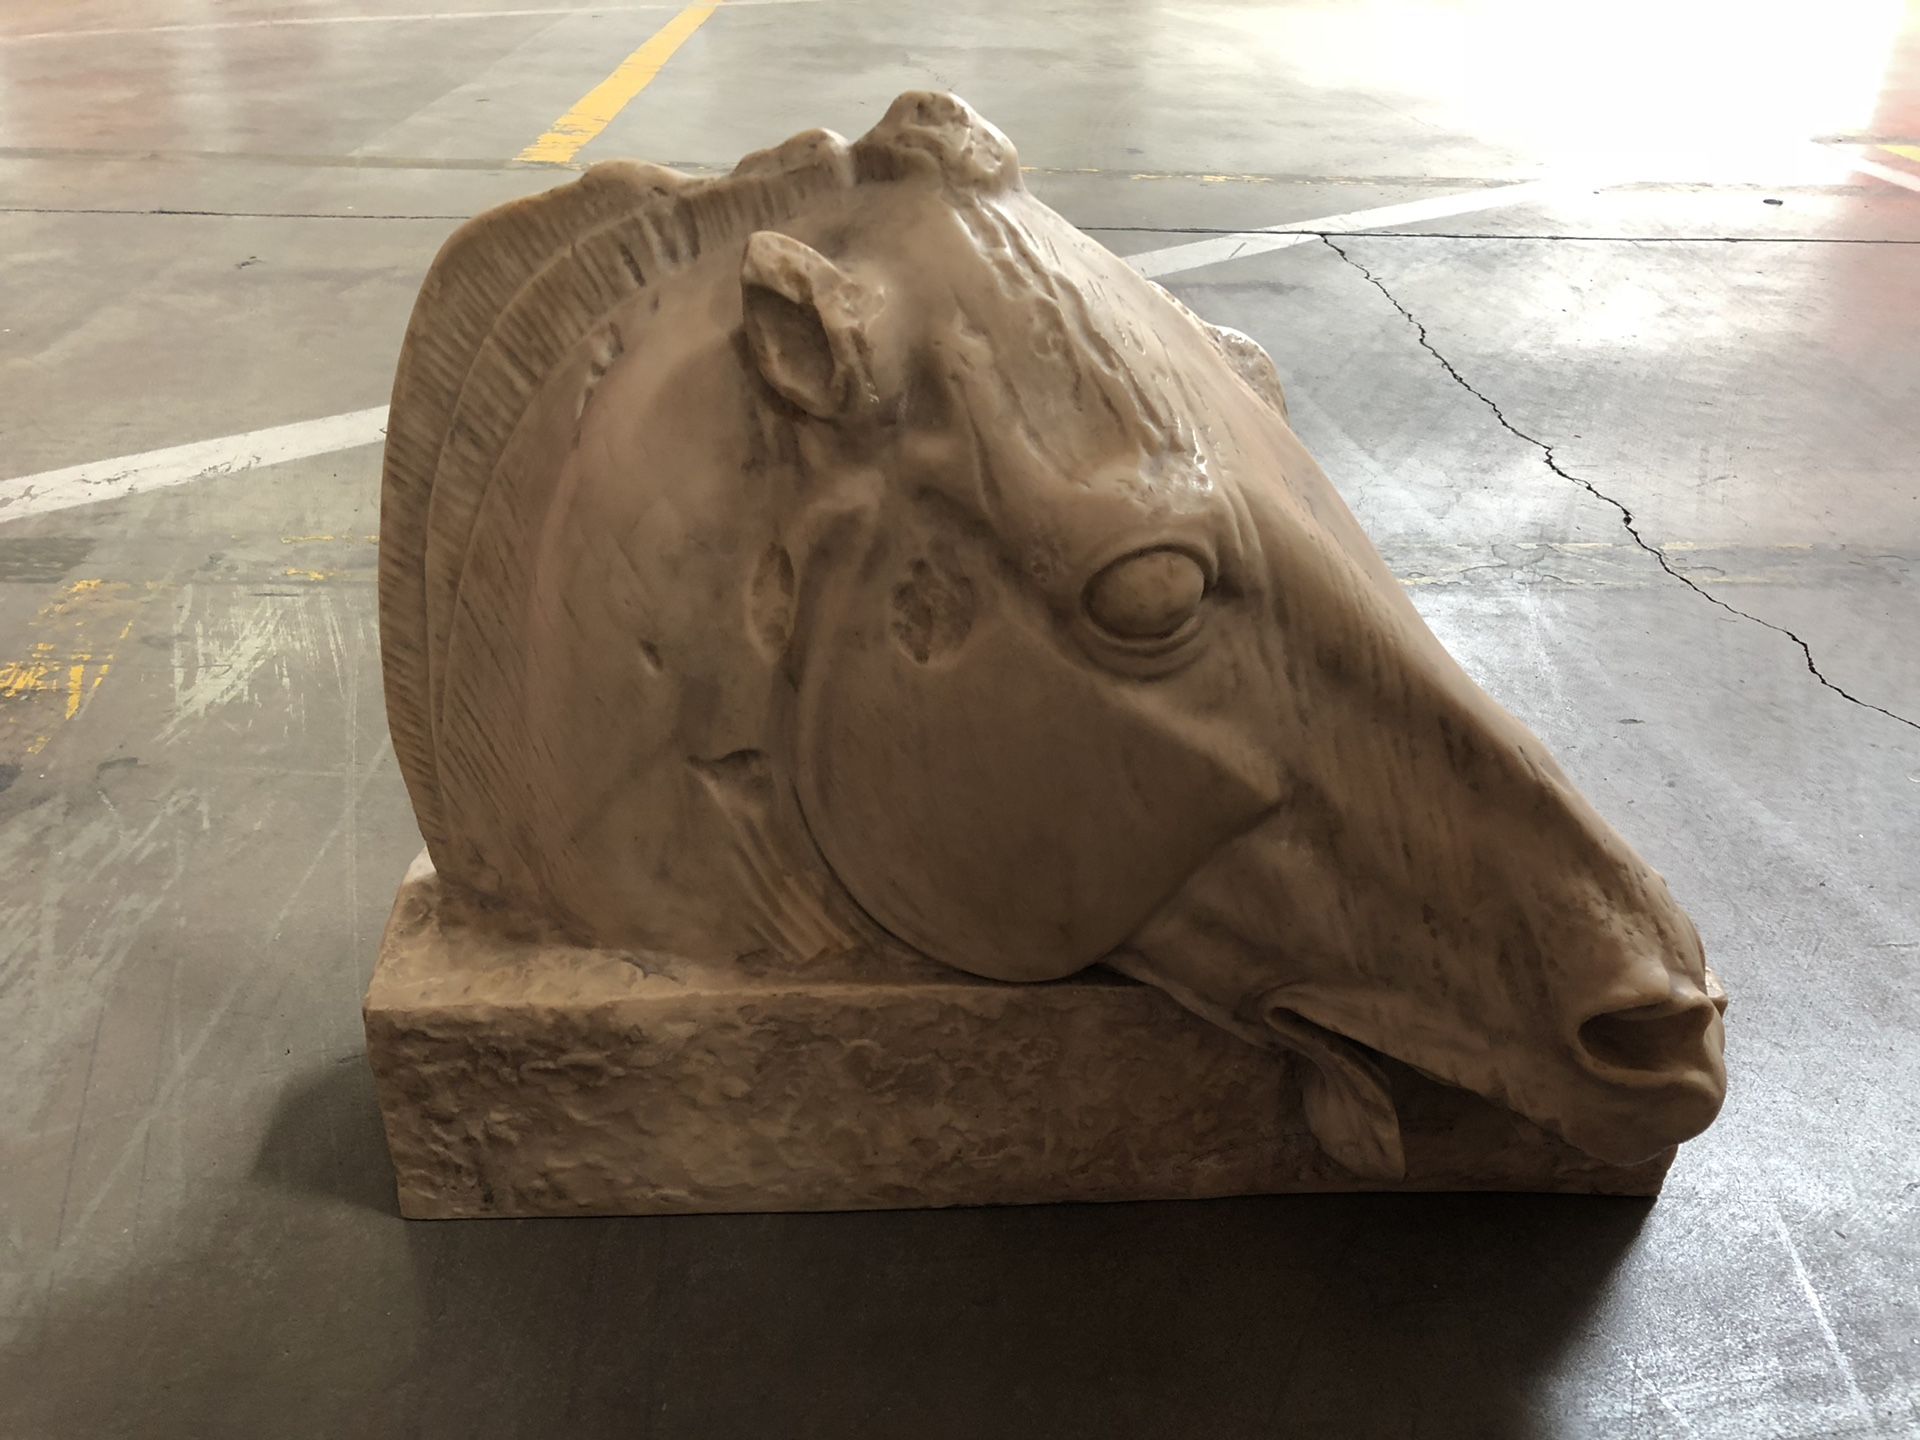 Horse head copy from East pediment of Parthenon